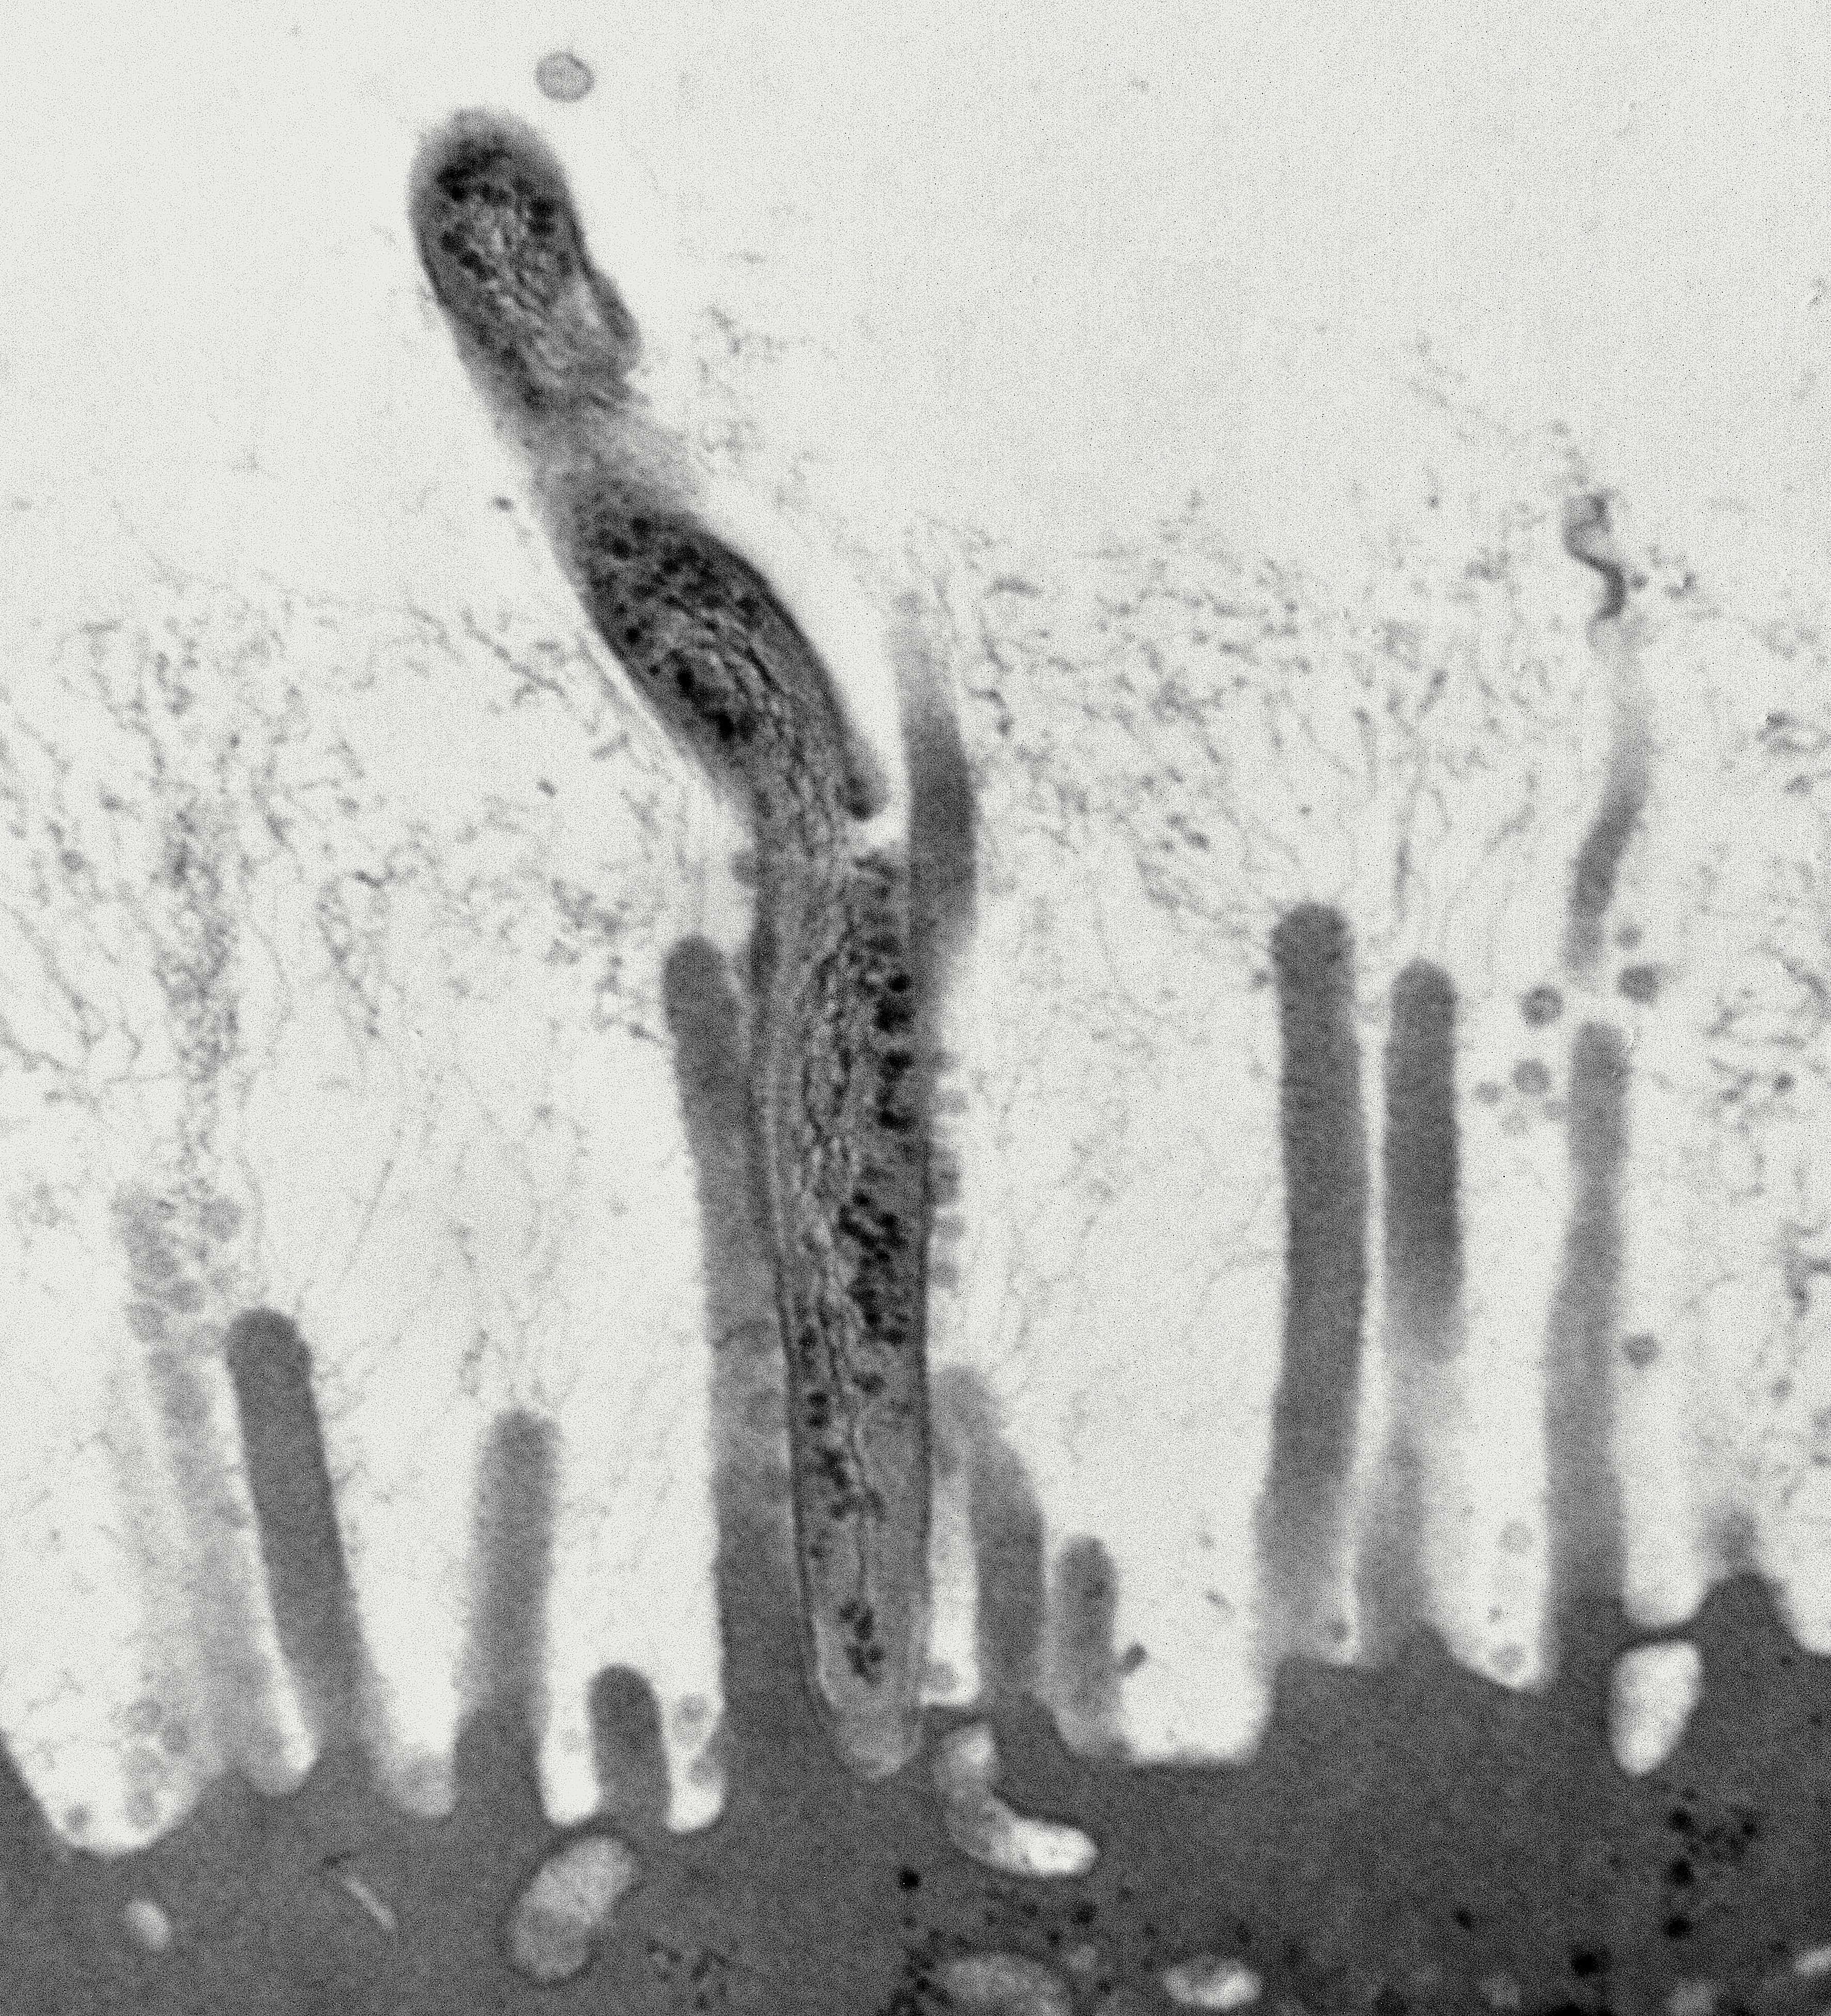 bacteria interacting with microvilli